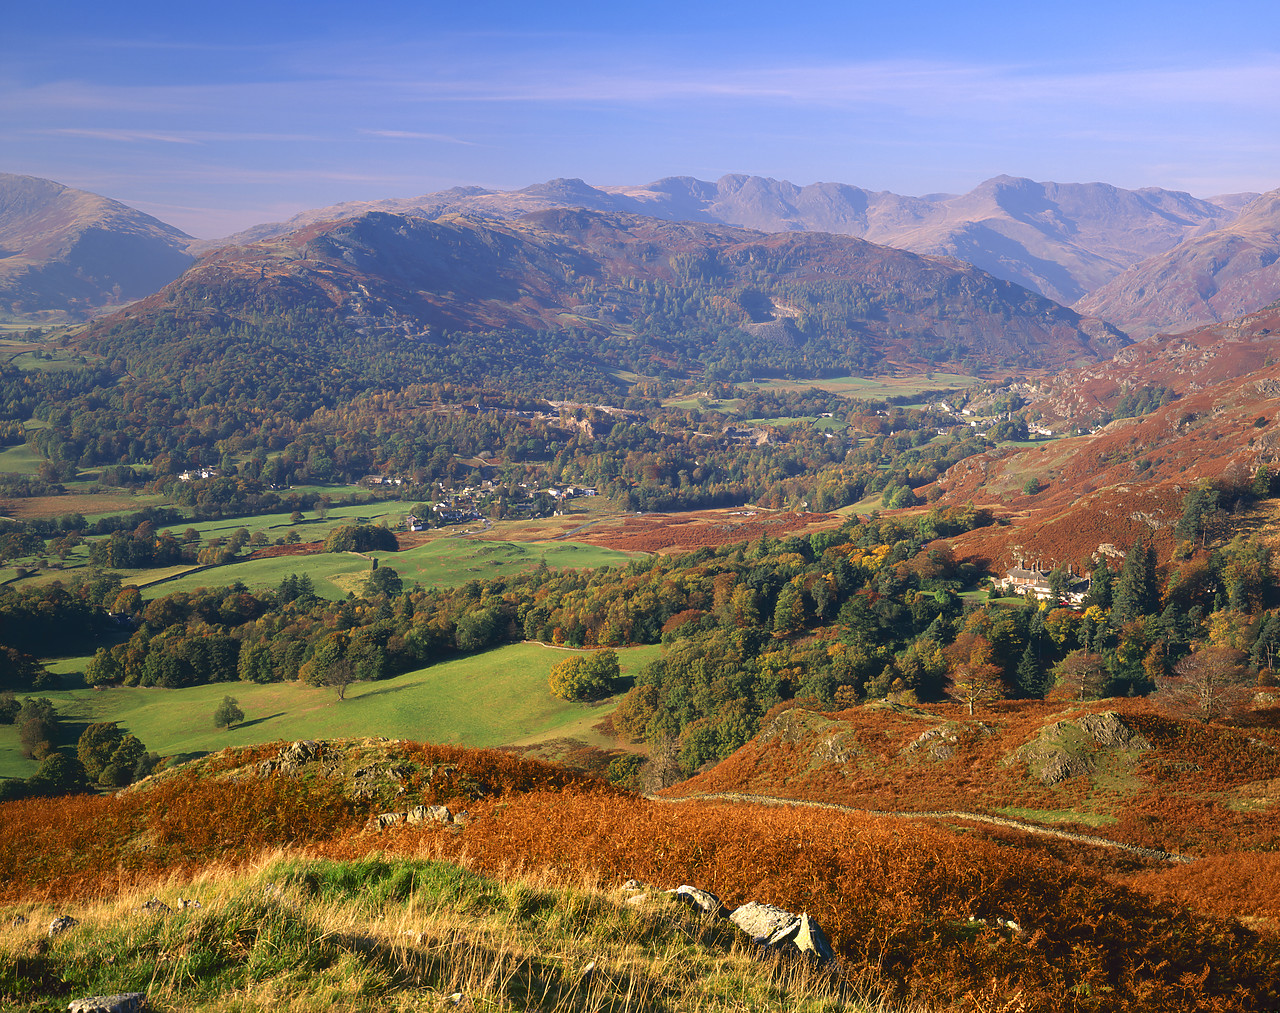 #970451-1 - View From Loughrigg Fell, Lake District National Park, Cumbria, England